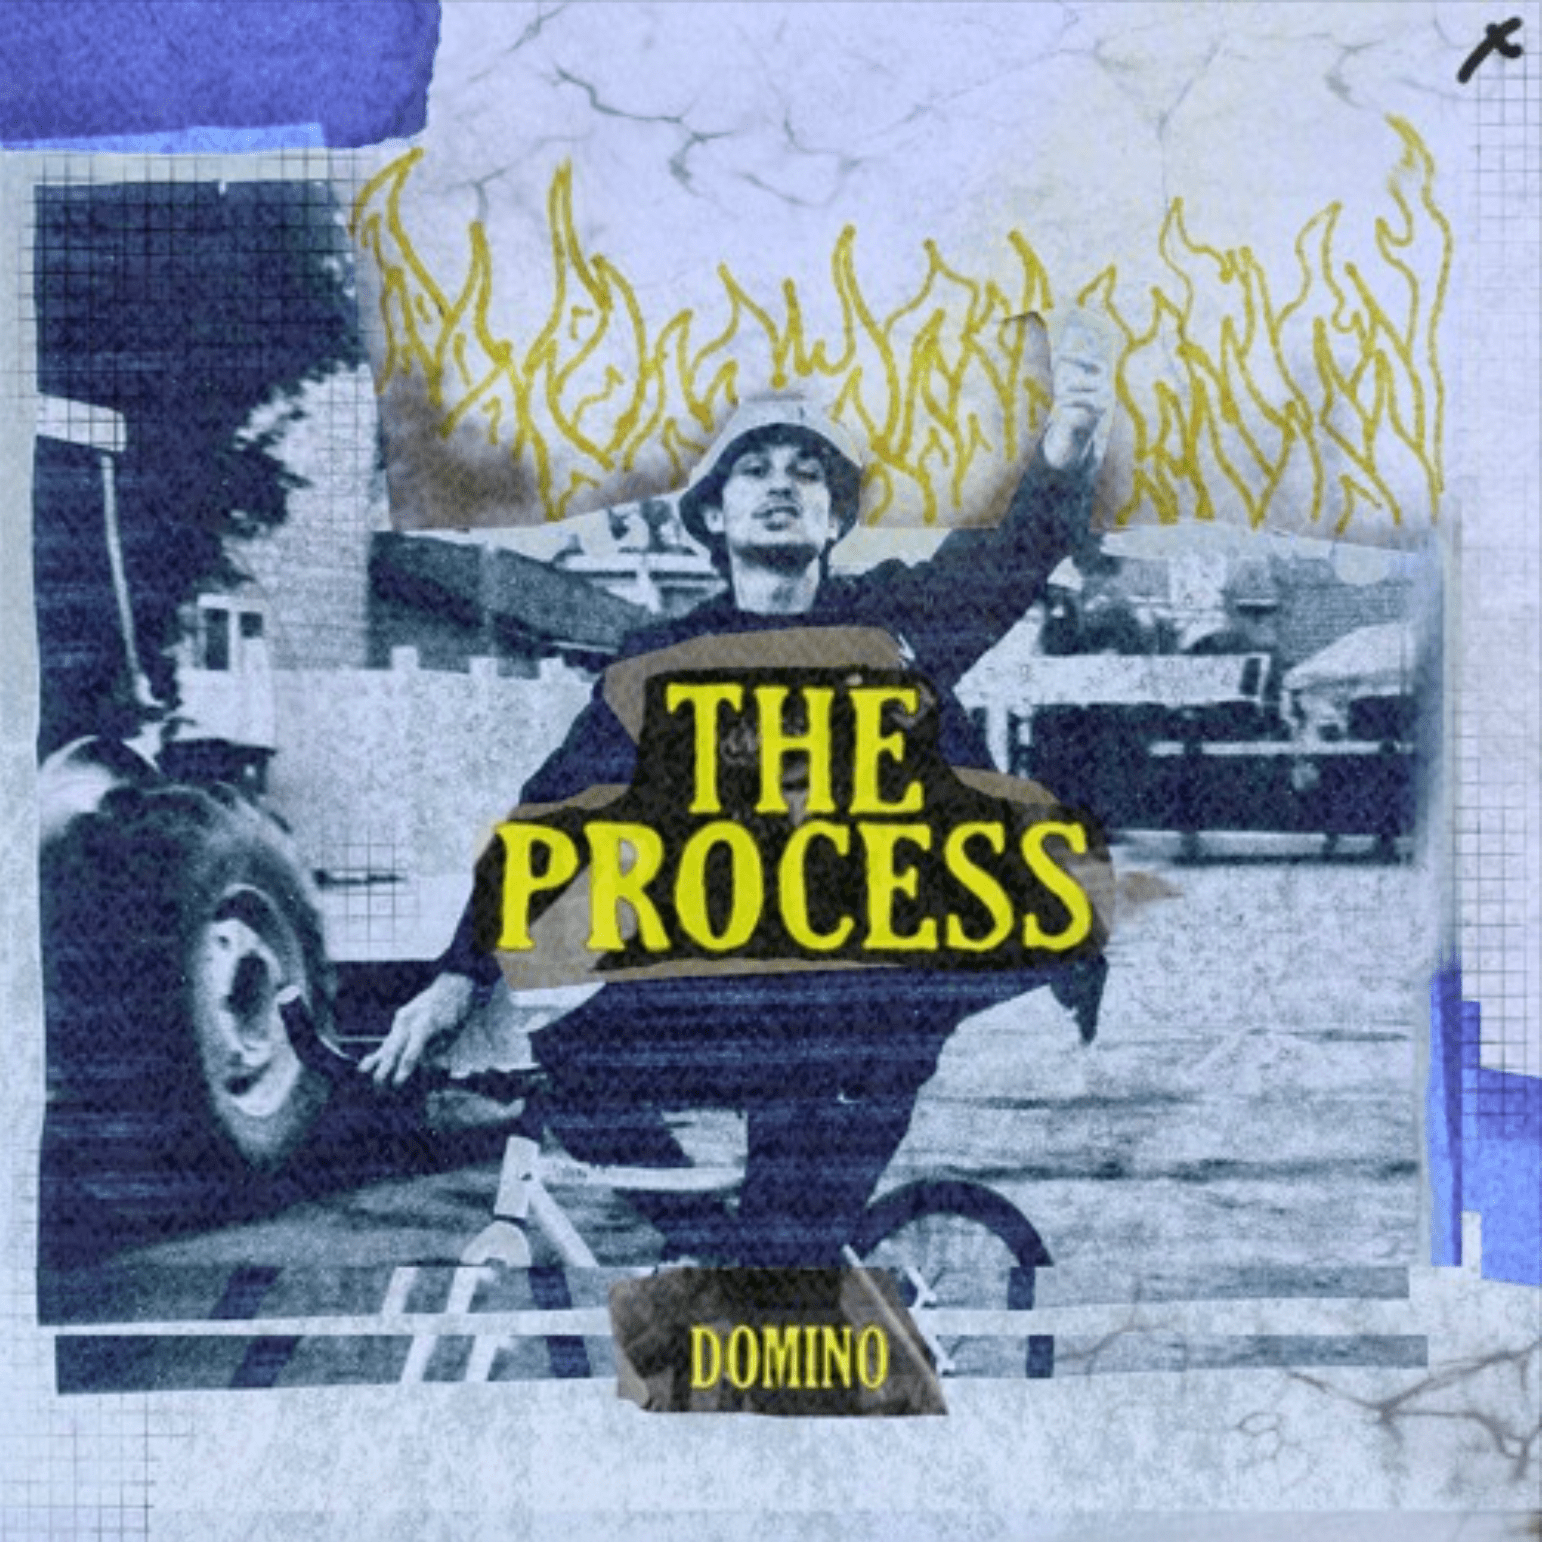 Cover art for Domino's song: The Process (2020)